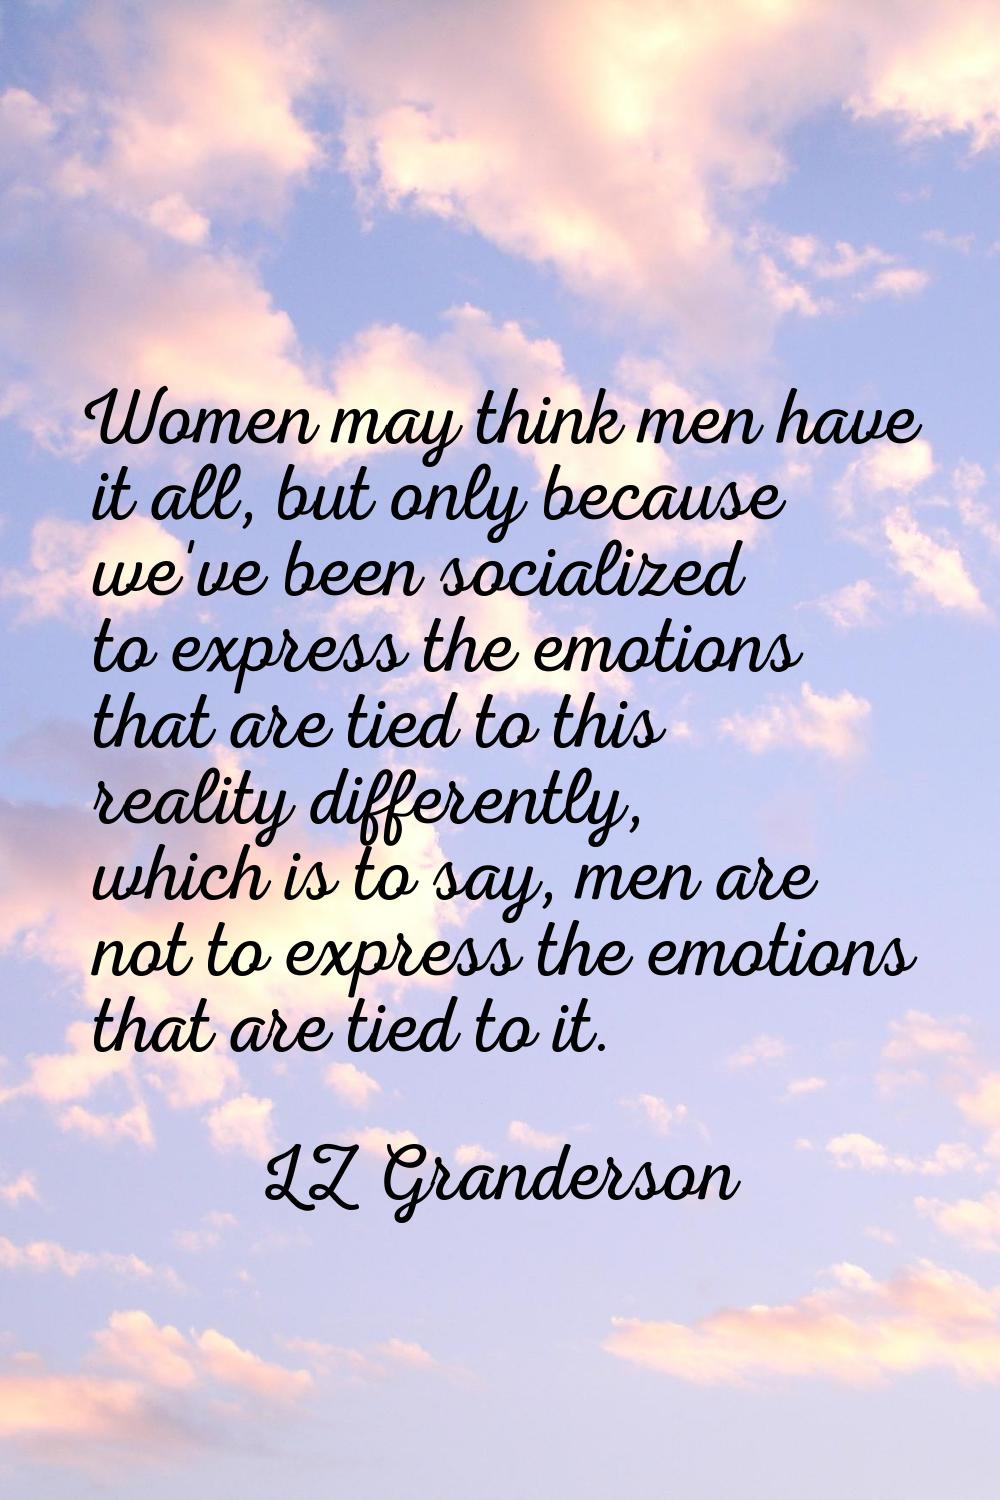 Women may think men have it all, but only because we've been socialized to express the emotions tha